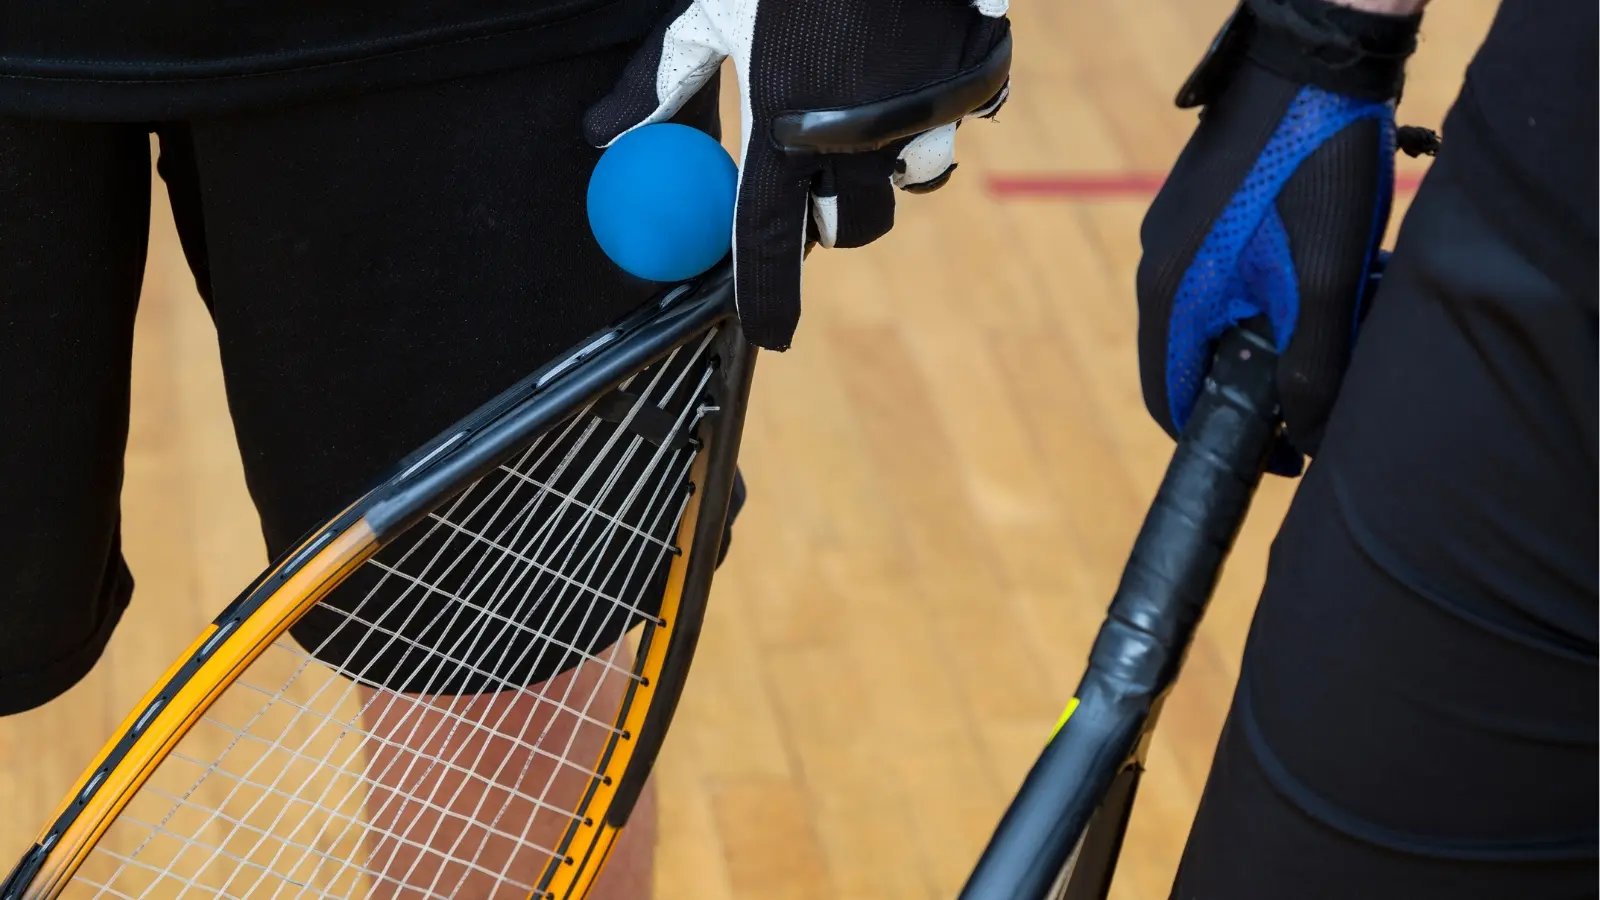 Conclusion - Playing Racquetball